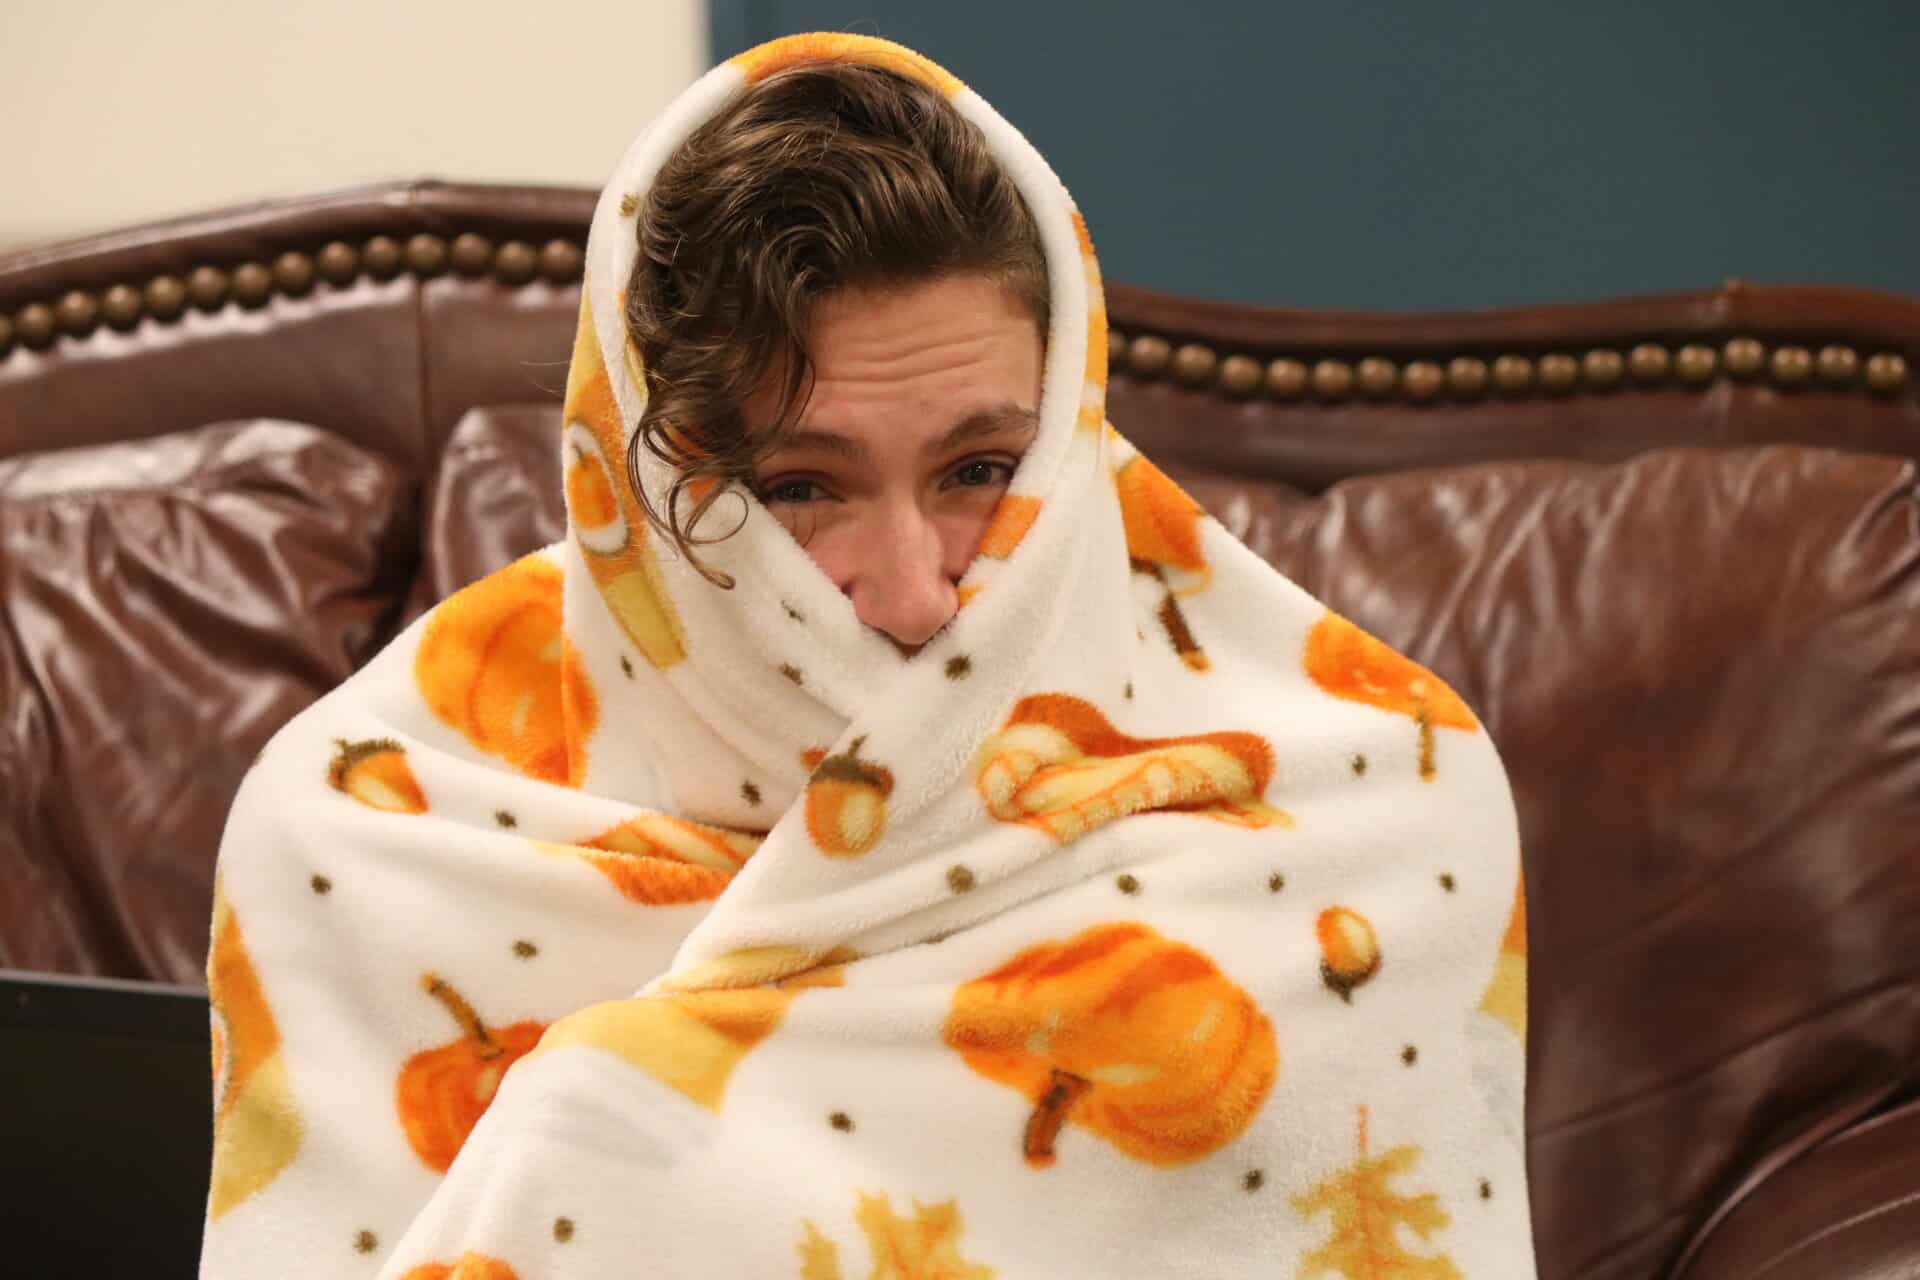 JP Waynick, wrapped in his incredibly soft pumpkin blanket, gives his look of approval. These can be bought at Hamricks.